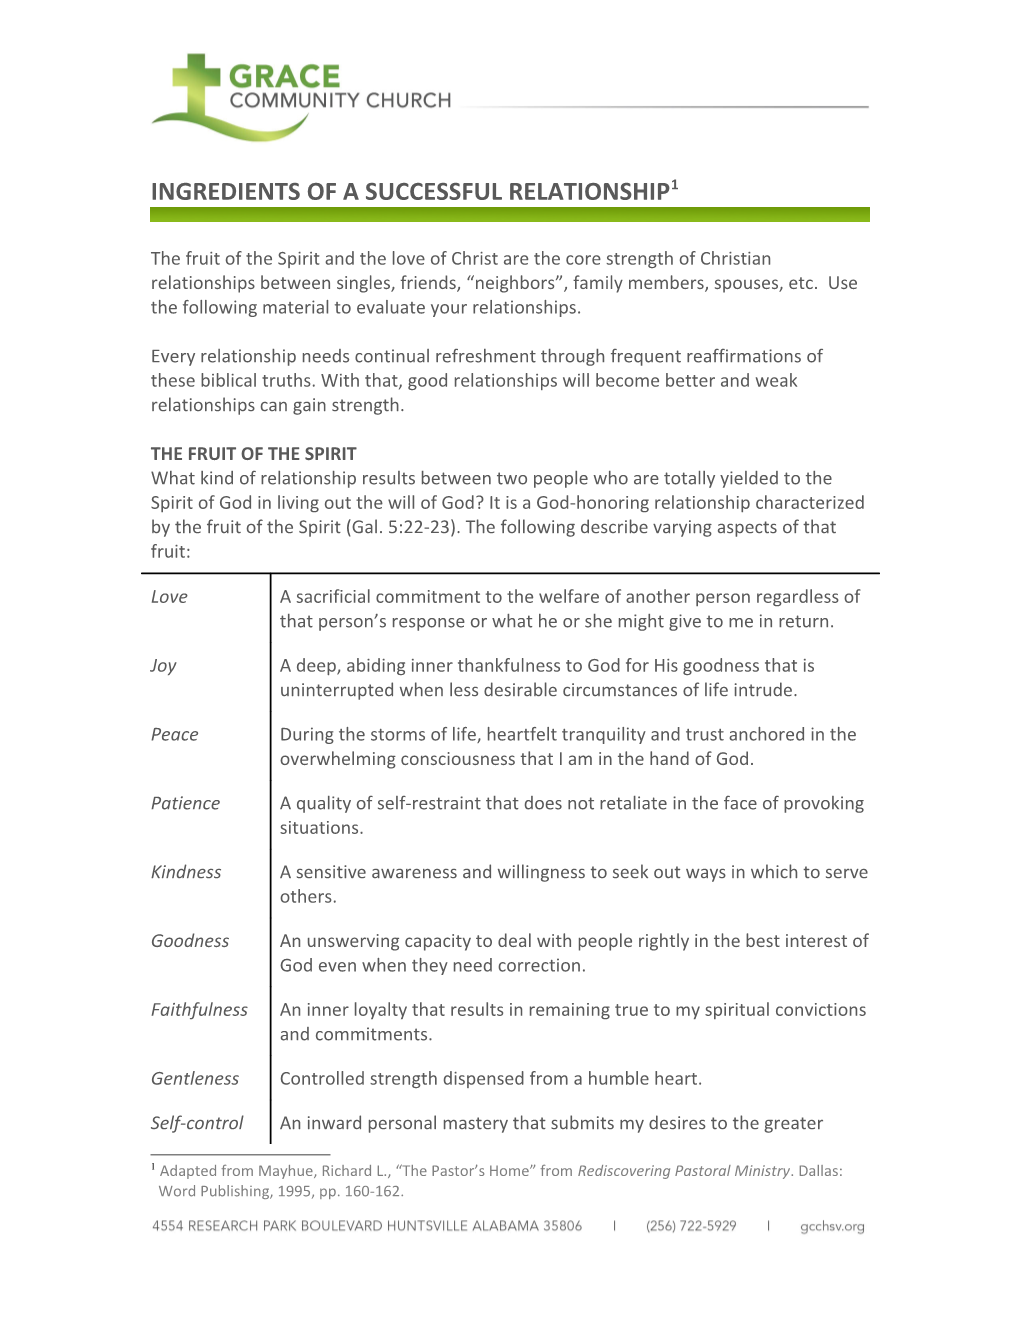 Ingredients of a Successful Relationship 1